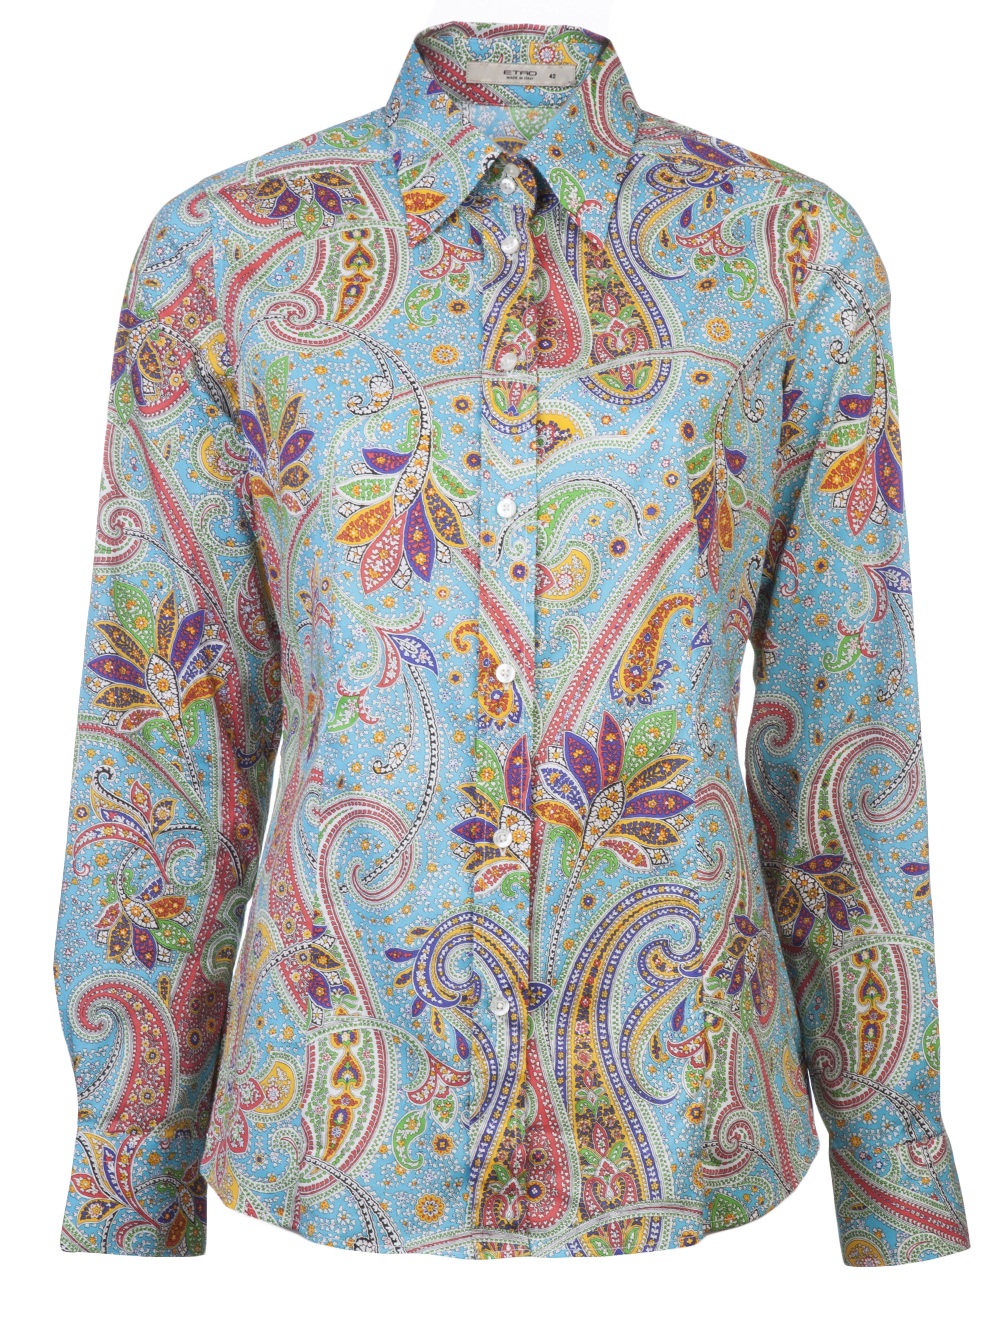 Etro Paisley Shirt in Blue - Lyst